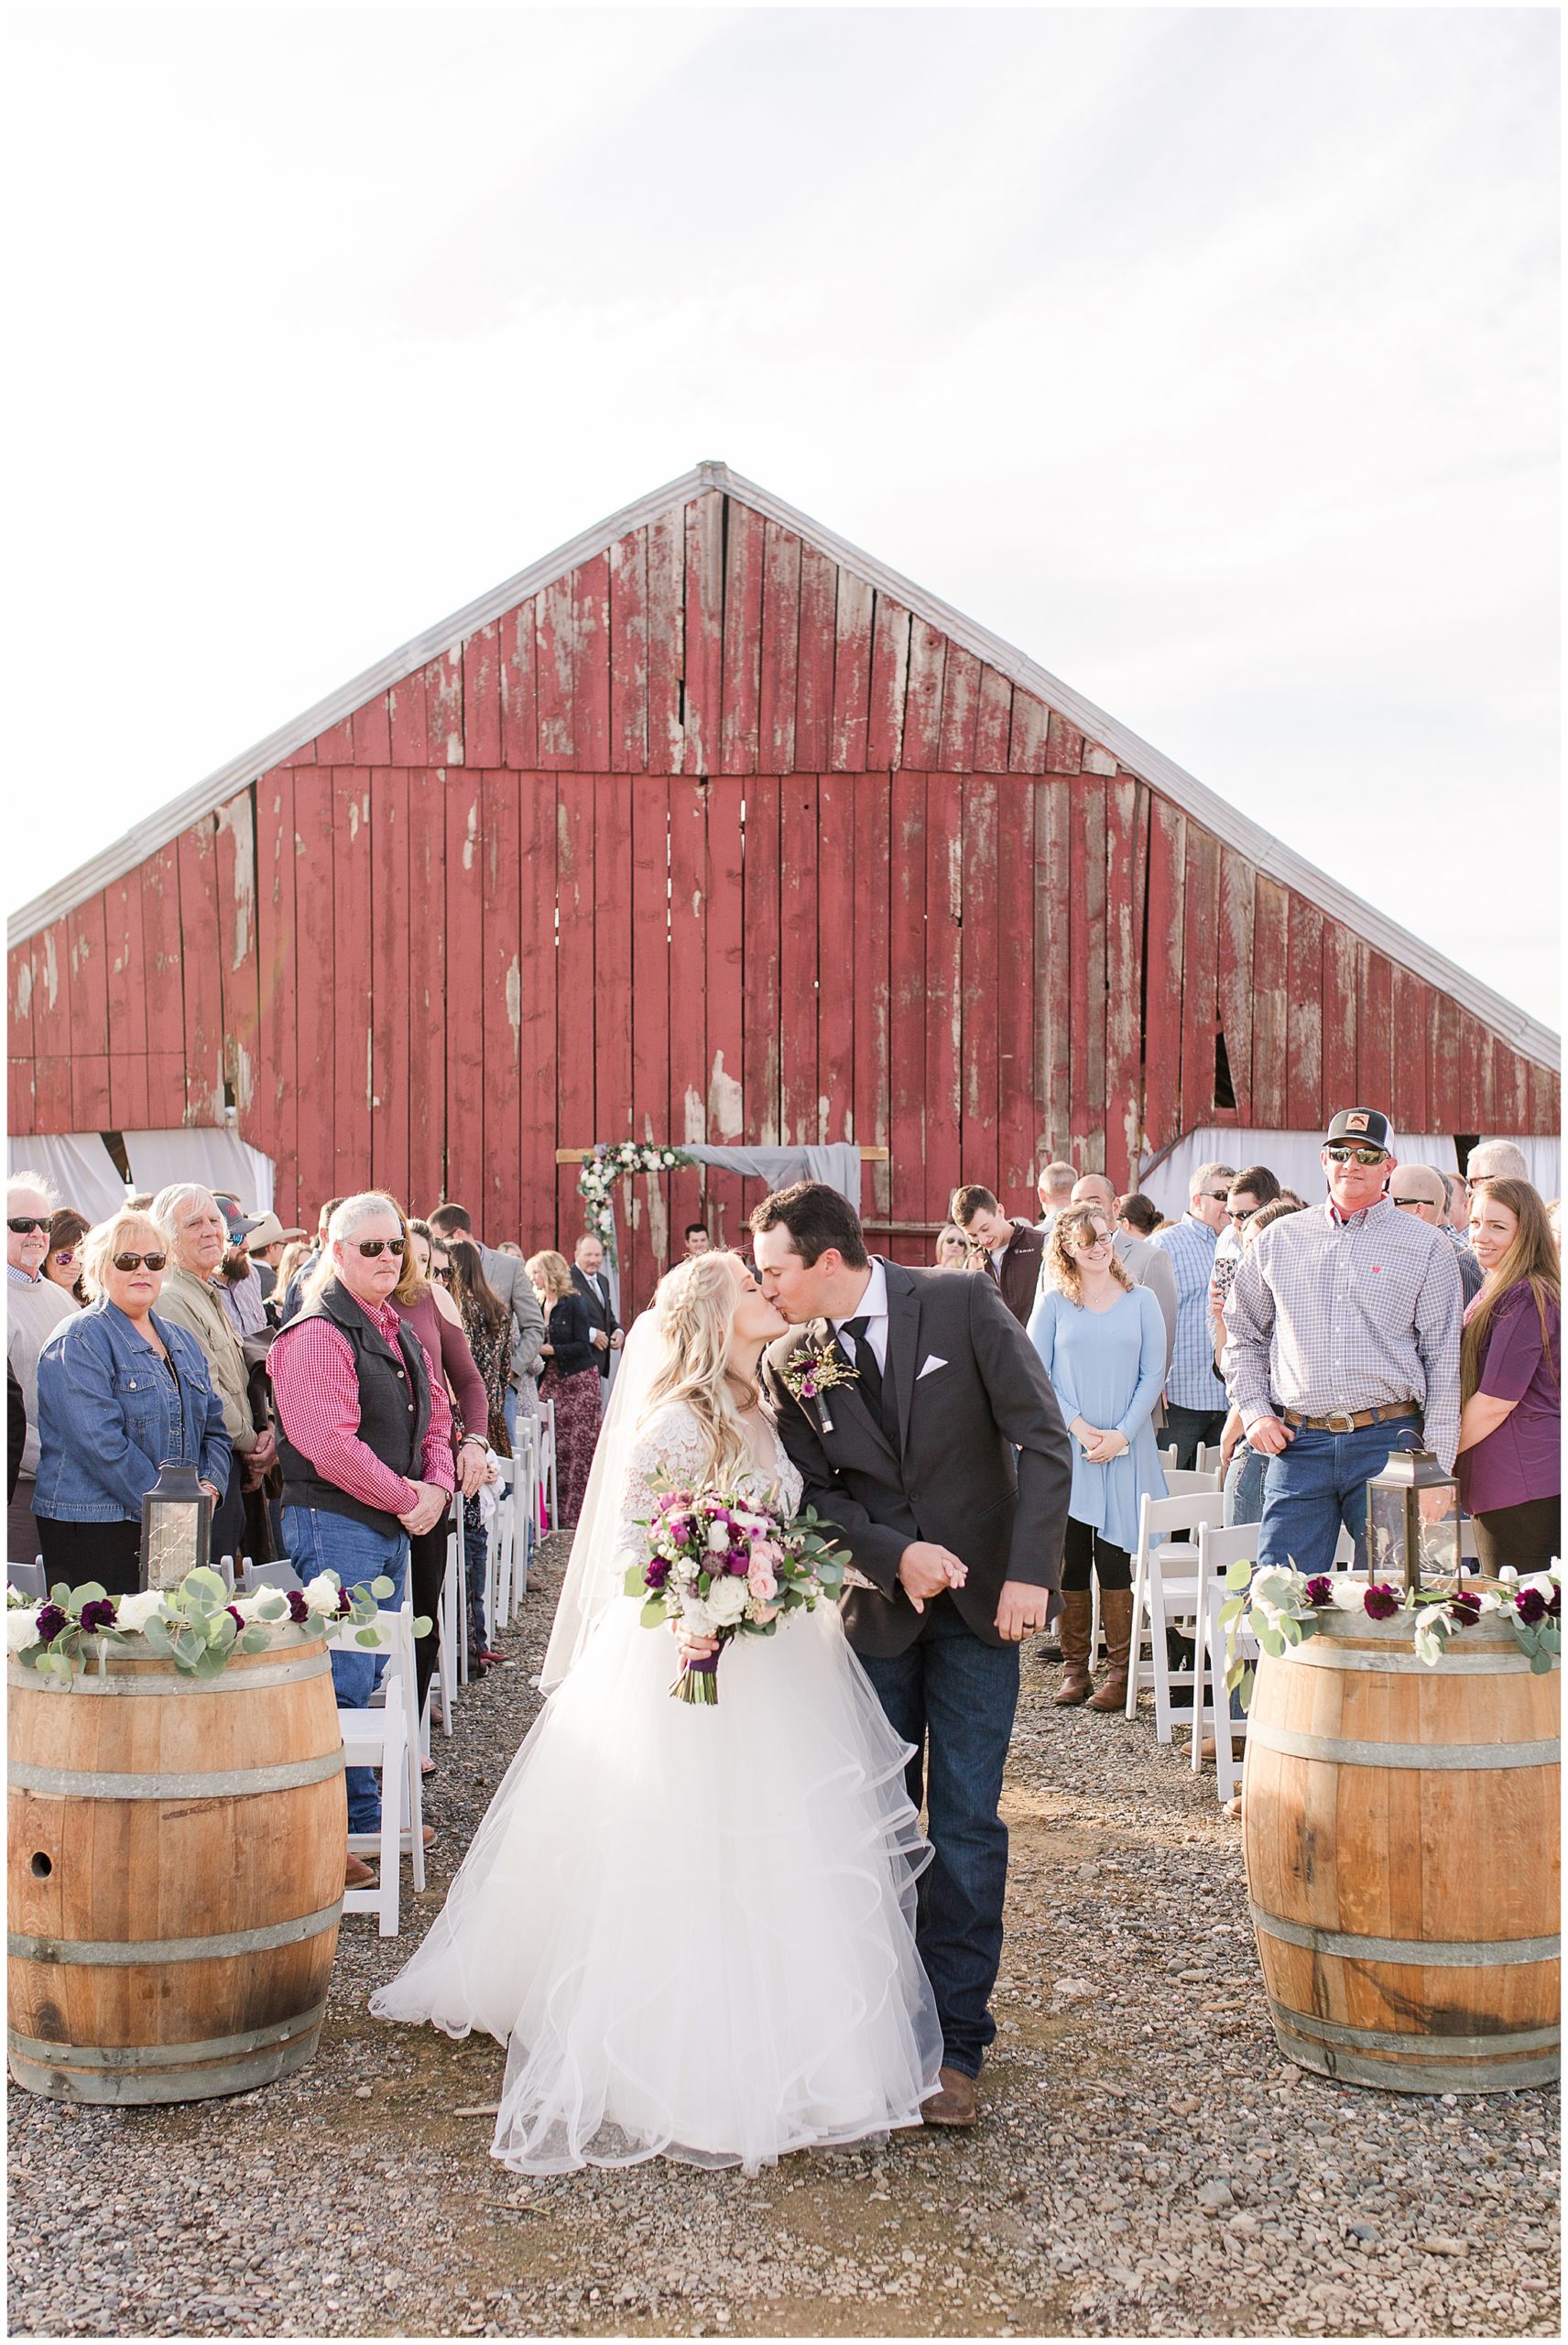 Country Wedding Willows California Red Barn Pole Barn Rustic Cowboy Boots,